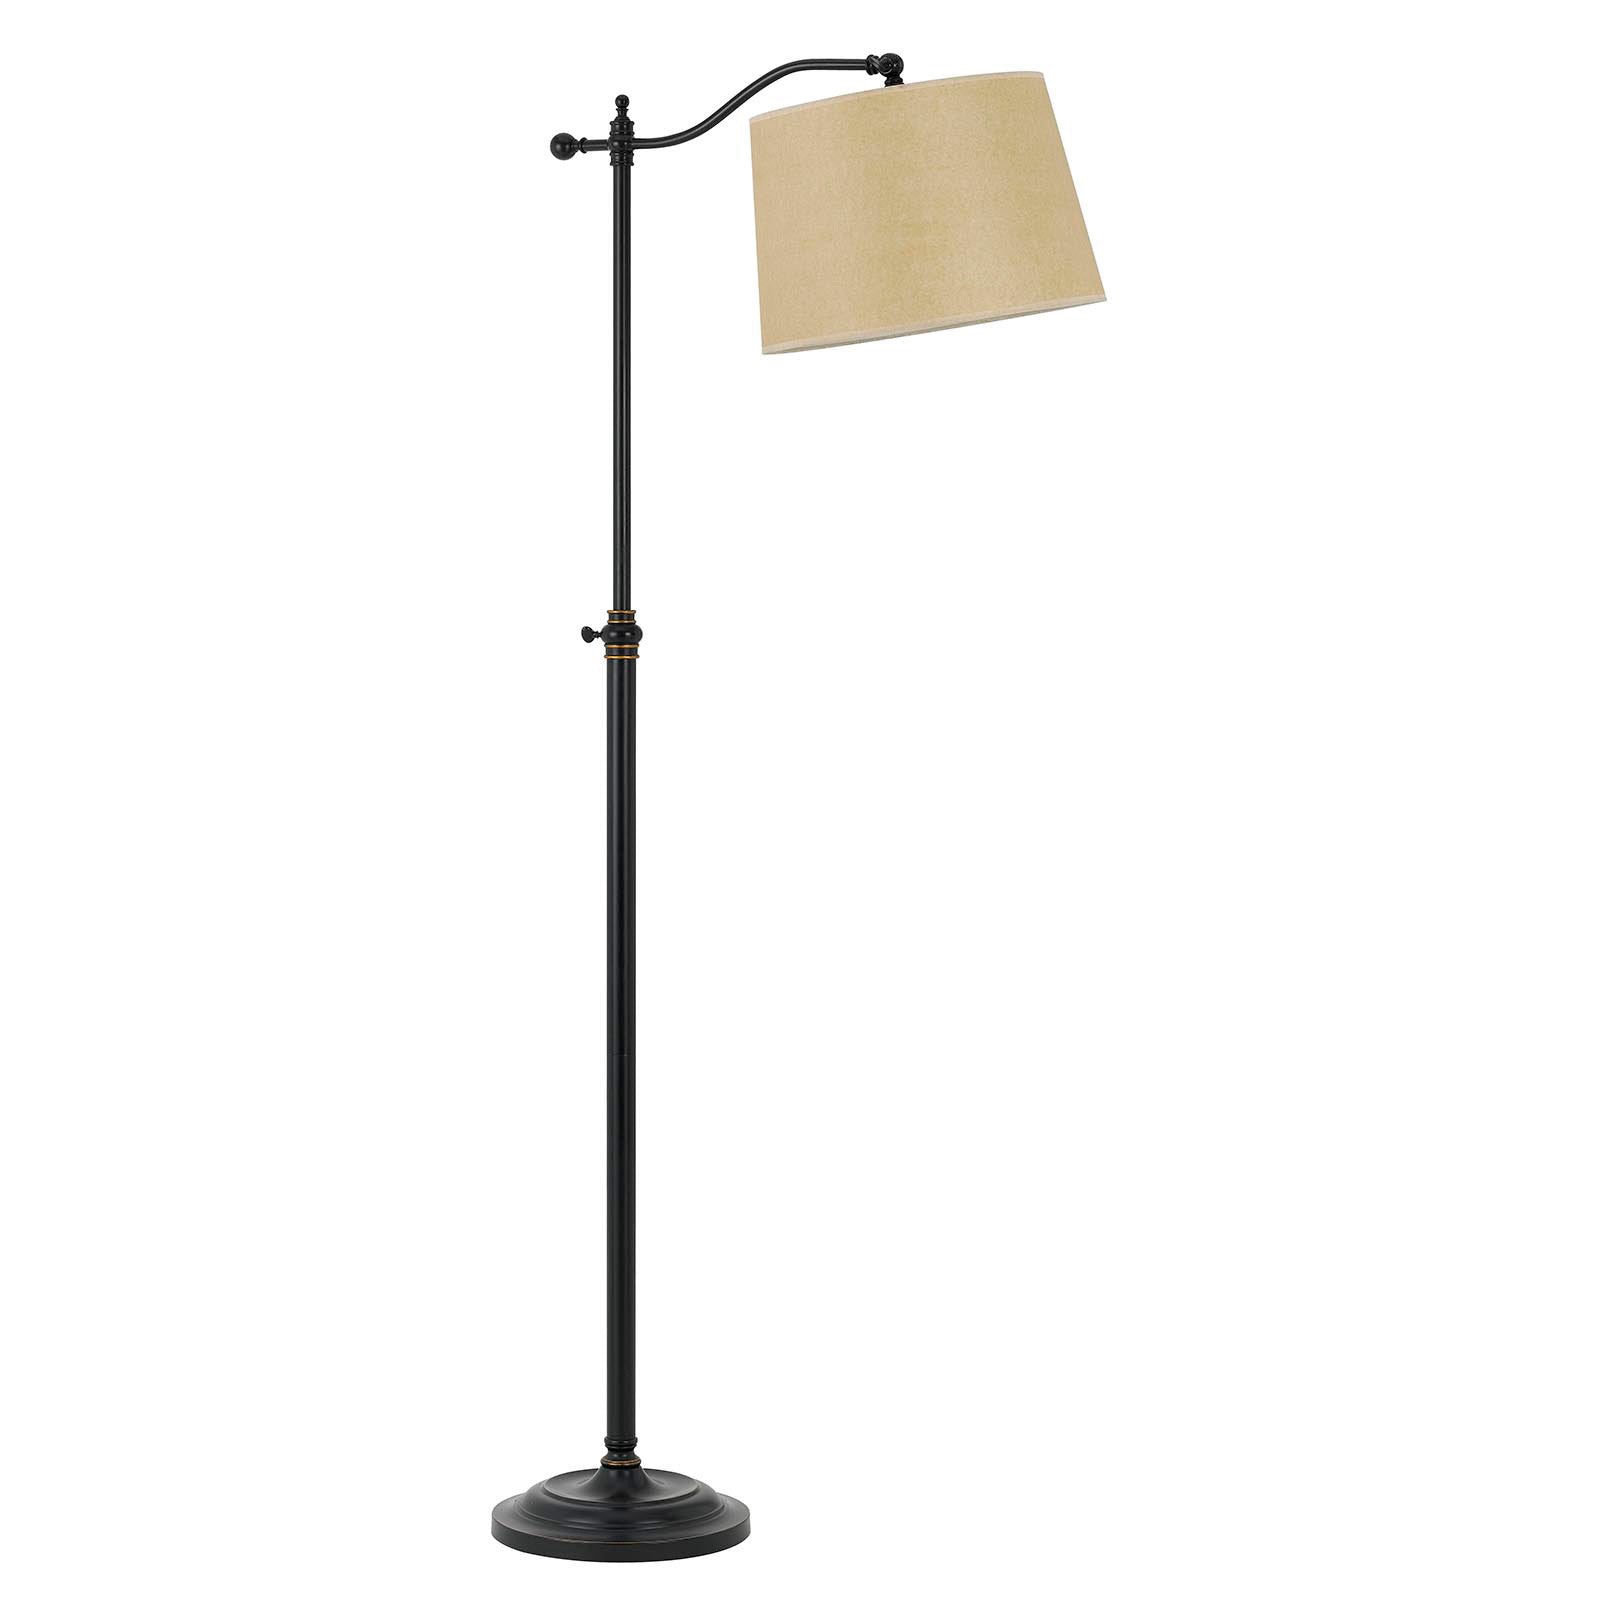 63" Bronze Adjustable Traditional Shaped Floor Lamp With Tan Square Shade